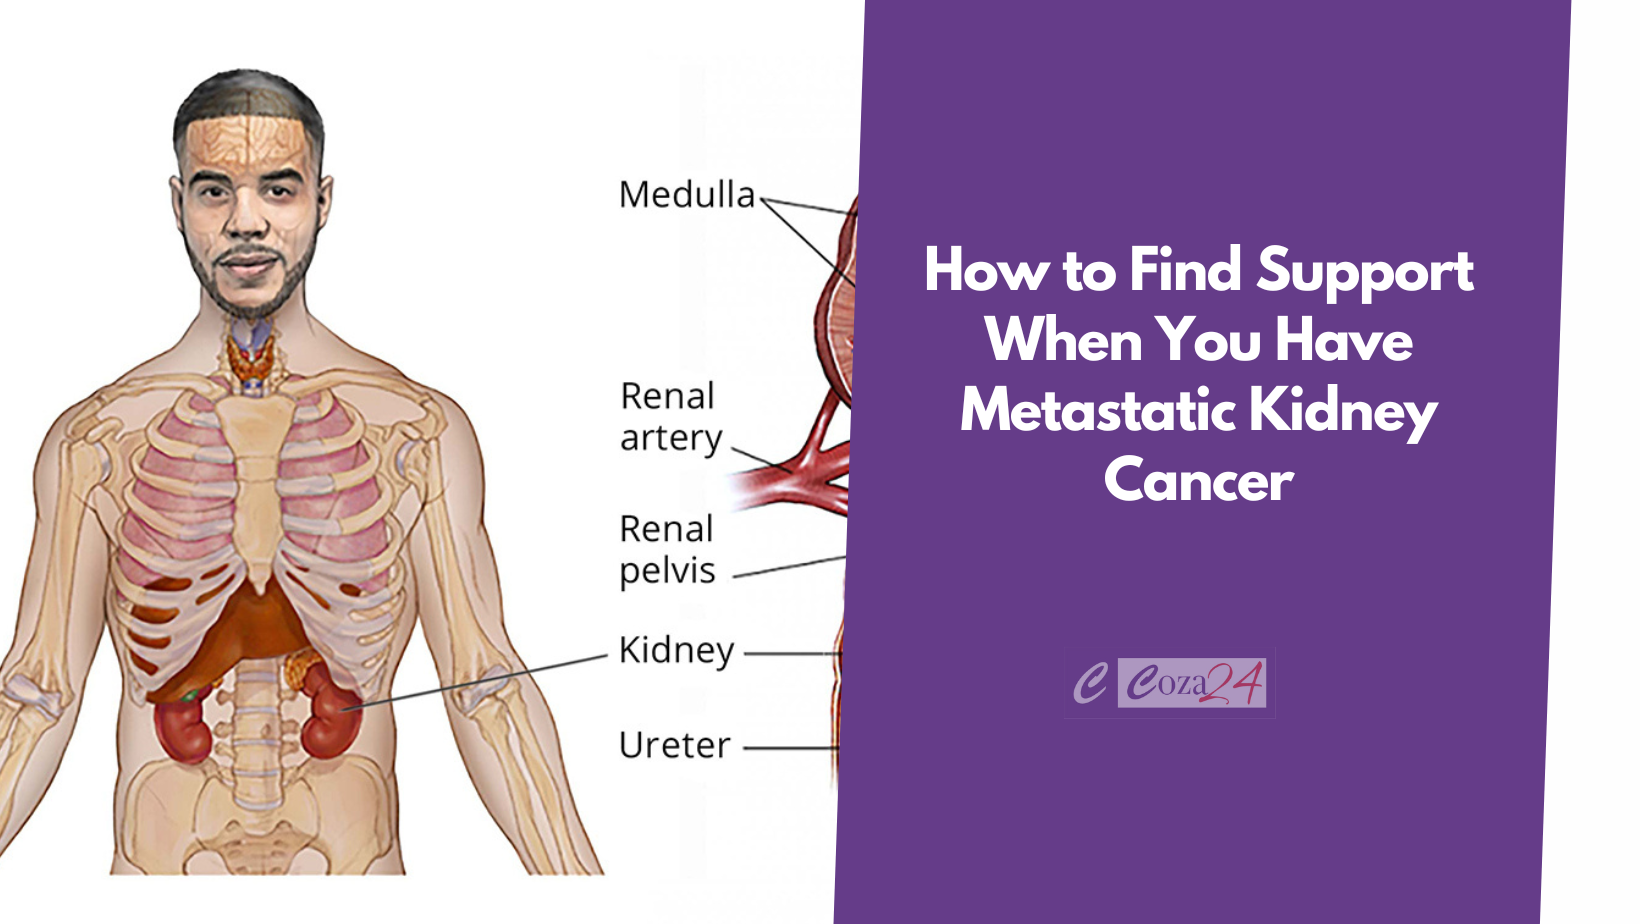 How to Find Support When You Have Metastatic Kidney Cancer